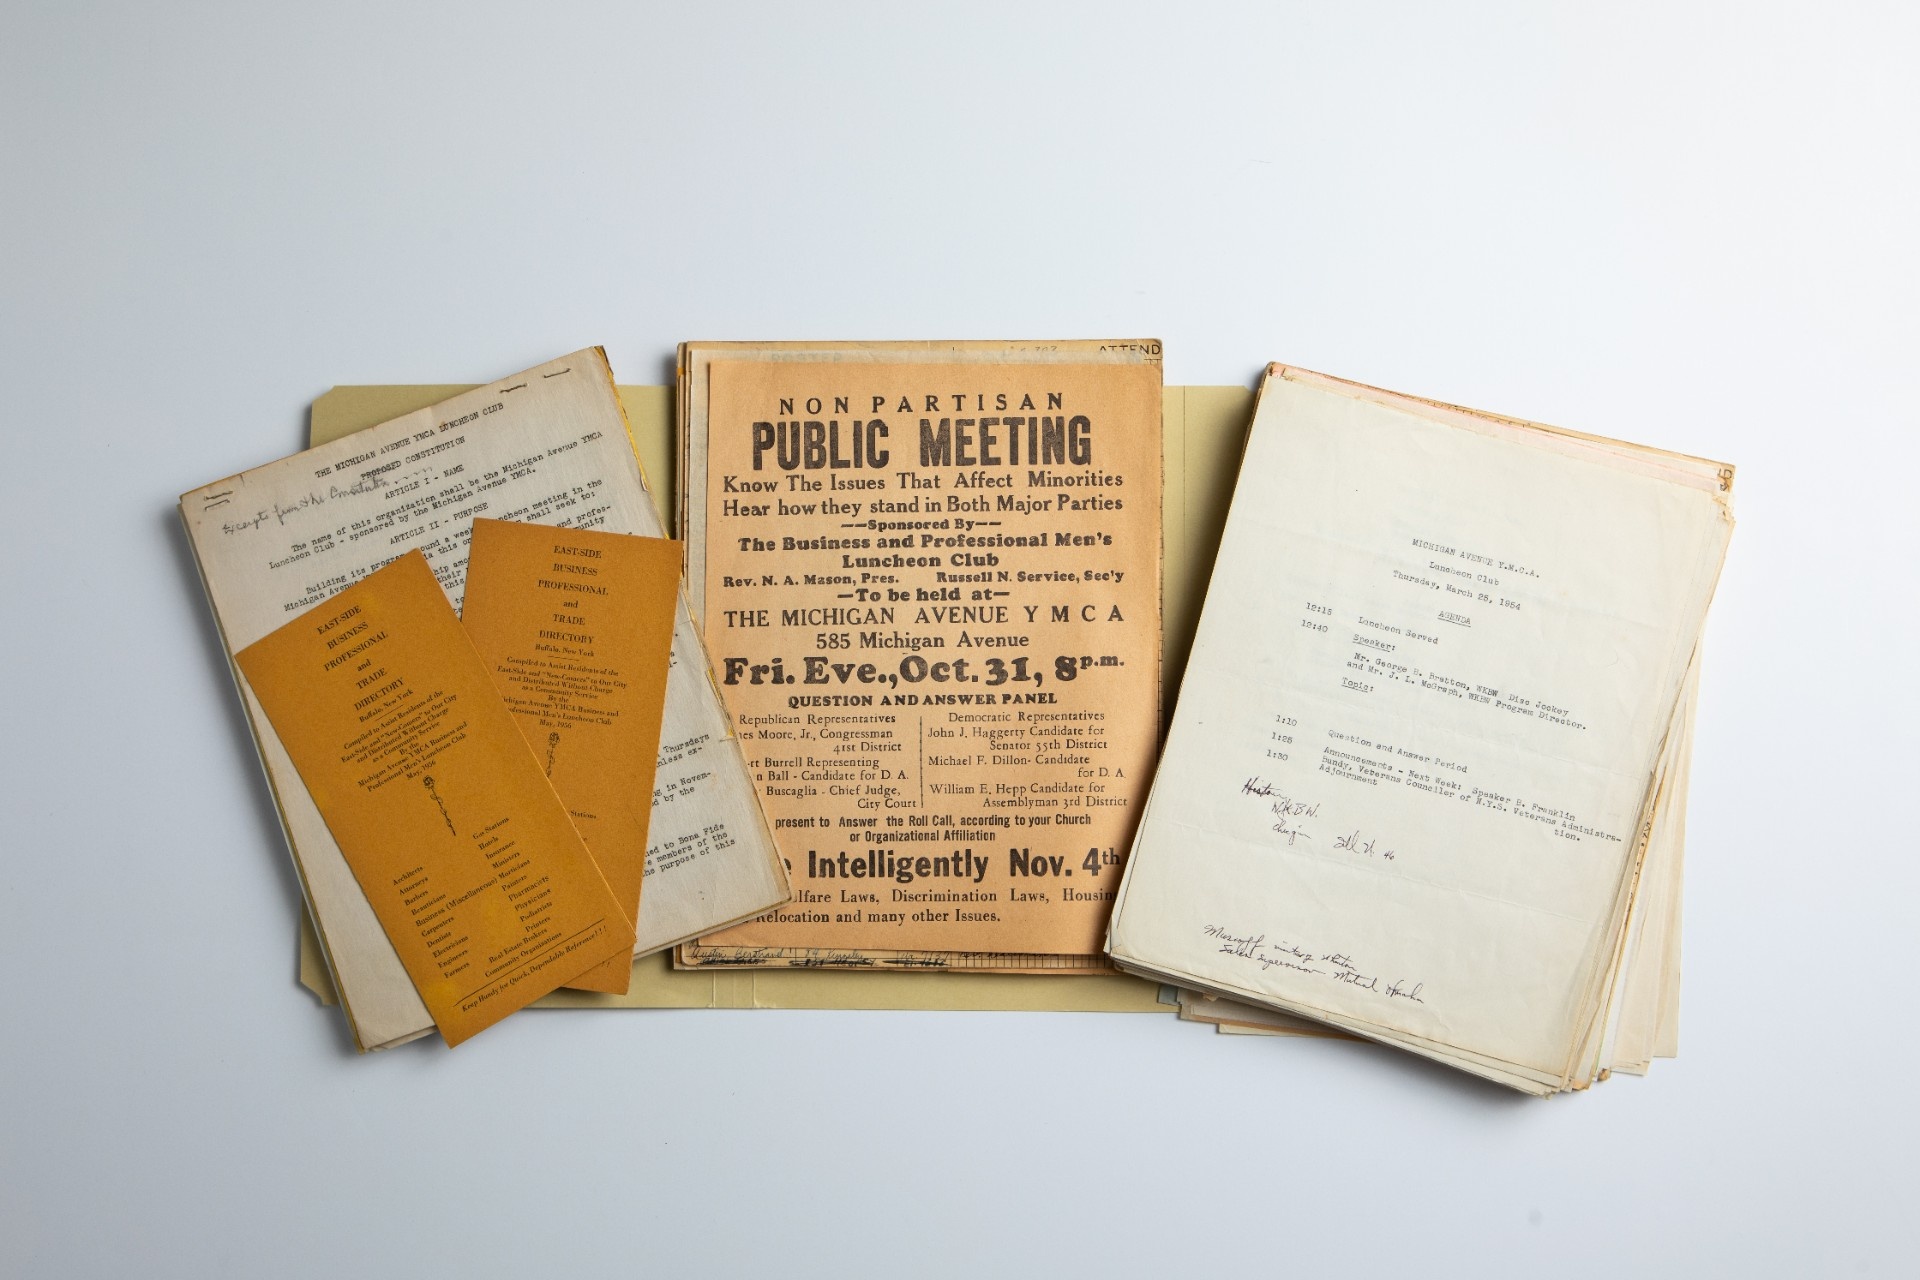 Old records from the Michigan Avenue Y.M.C.A. in Buffalo include items such as an East Side Business Professional and Trade Directory, a flyer for a public meeting with political candidates, and a luncheon club agenda. The items are part of a collection preserved by Lillian S. Williams, who partnered with the Y.M.C.A branch years ago to house its records at the University Archives, University at Buffalo, the State University of New York. Williams was first vice-president of the Afro-American Historical Association of the Niagara Frontier at the time she collected the items as part of the association's initiative to preserve records pertaining to Buffalo's African American community. (Credit: Douglas Levere / University at Buffalo)